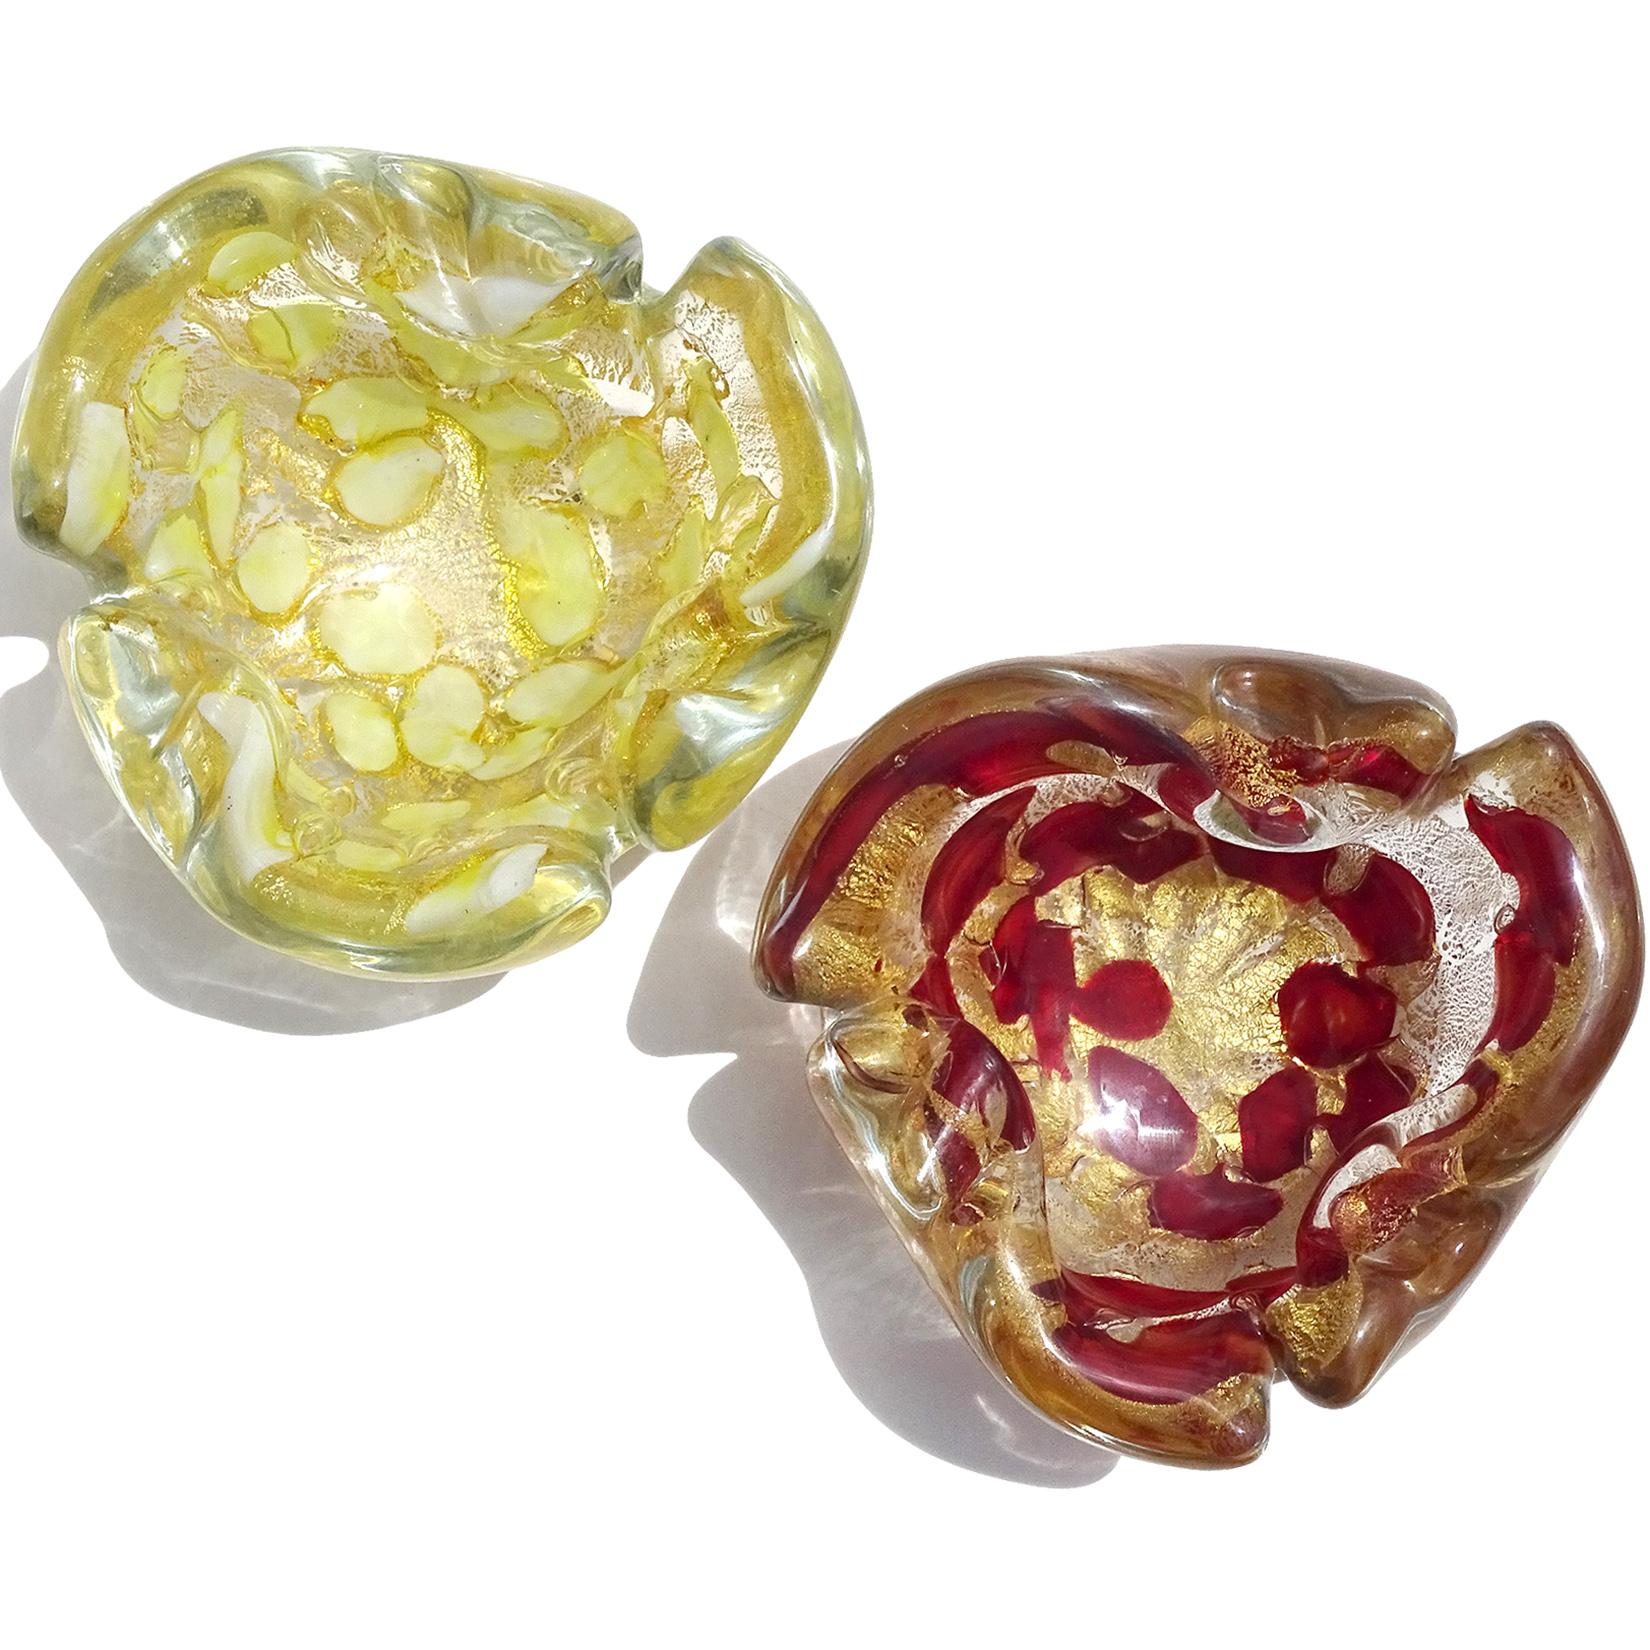 Priced per item (2 colors available as shown). Beautiful vintage Murano hand blown gold flecks Italian art glass bowl or ashtray. Documented to the Barovier e Toso Company. One decorated with yellow color spots, and the other with red. The bowls are